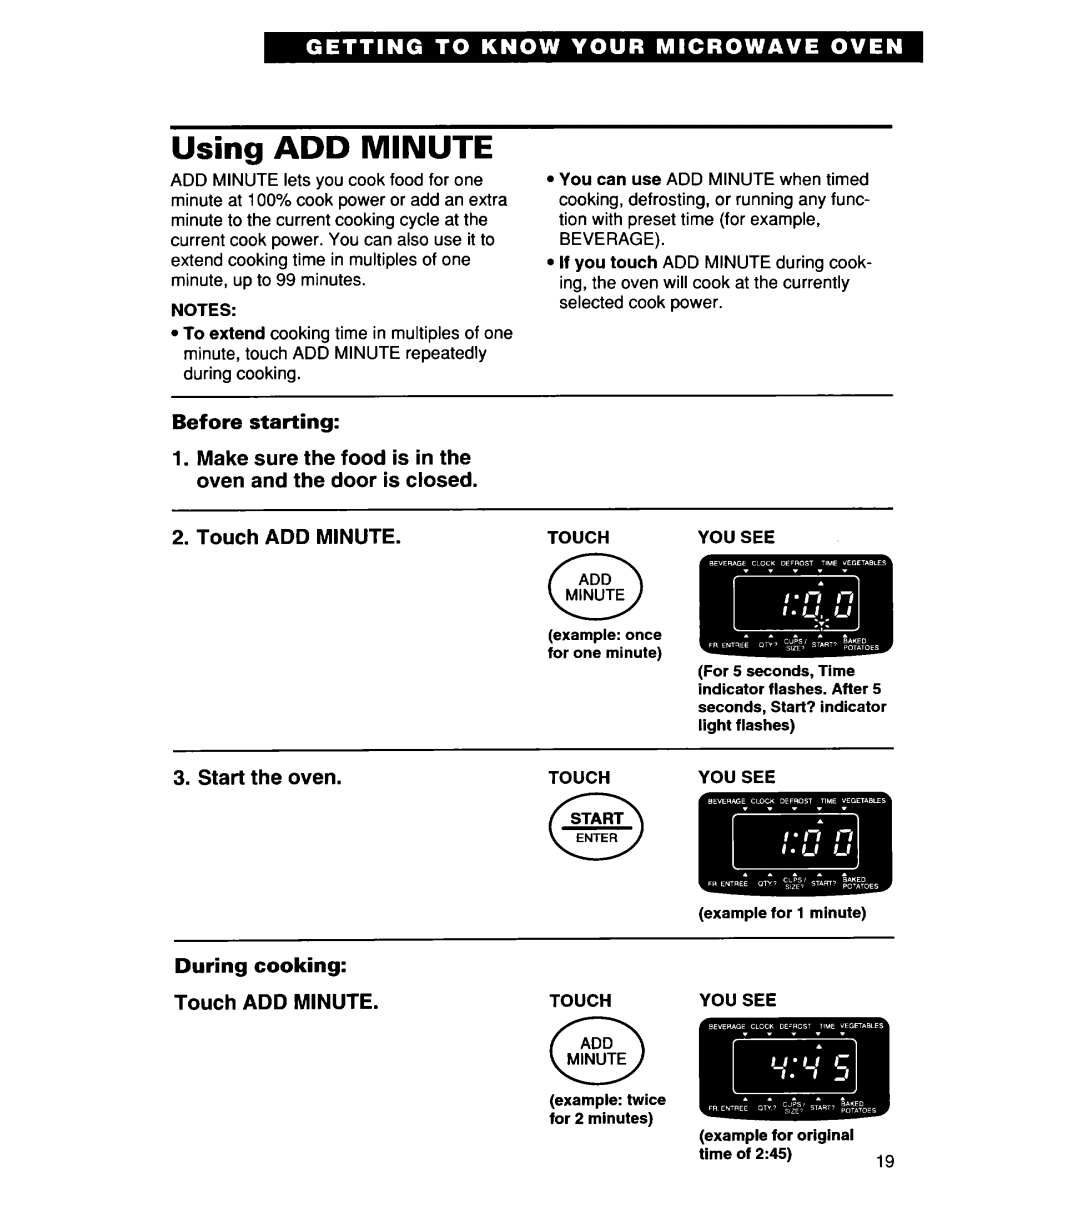 Whirlpool YMT9114SF, MT8118XE, MT8116XE 0ADD, Before starting, Touch ADD MINUTE, Start the oven, During cooking 